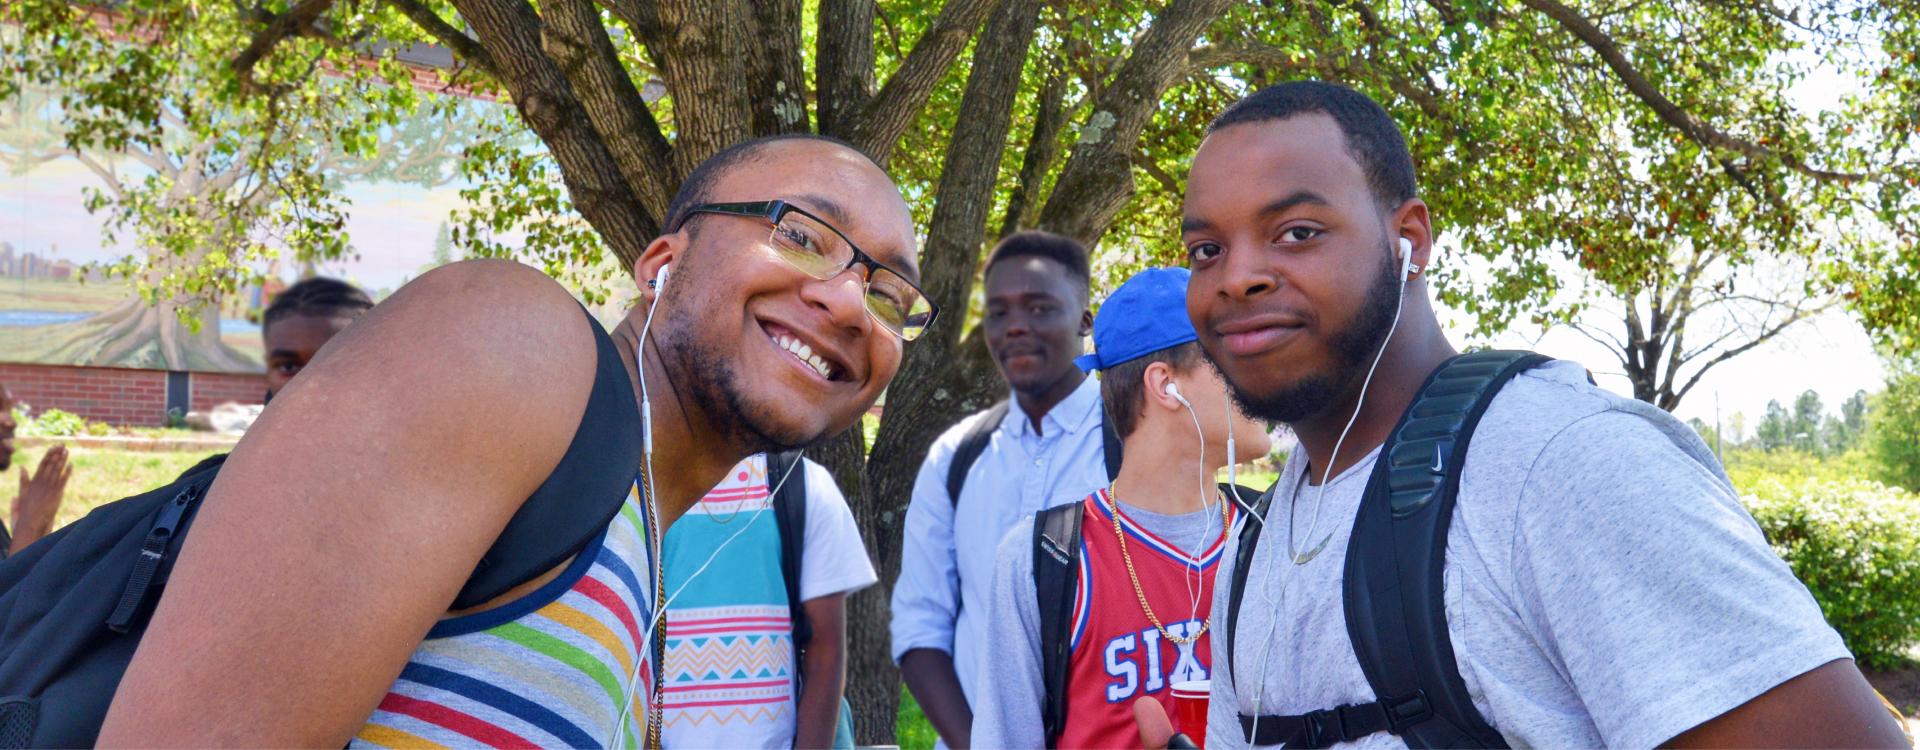 two students on main campus plaza outside smiling at camera